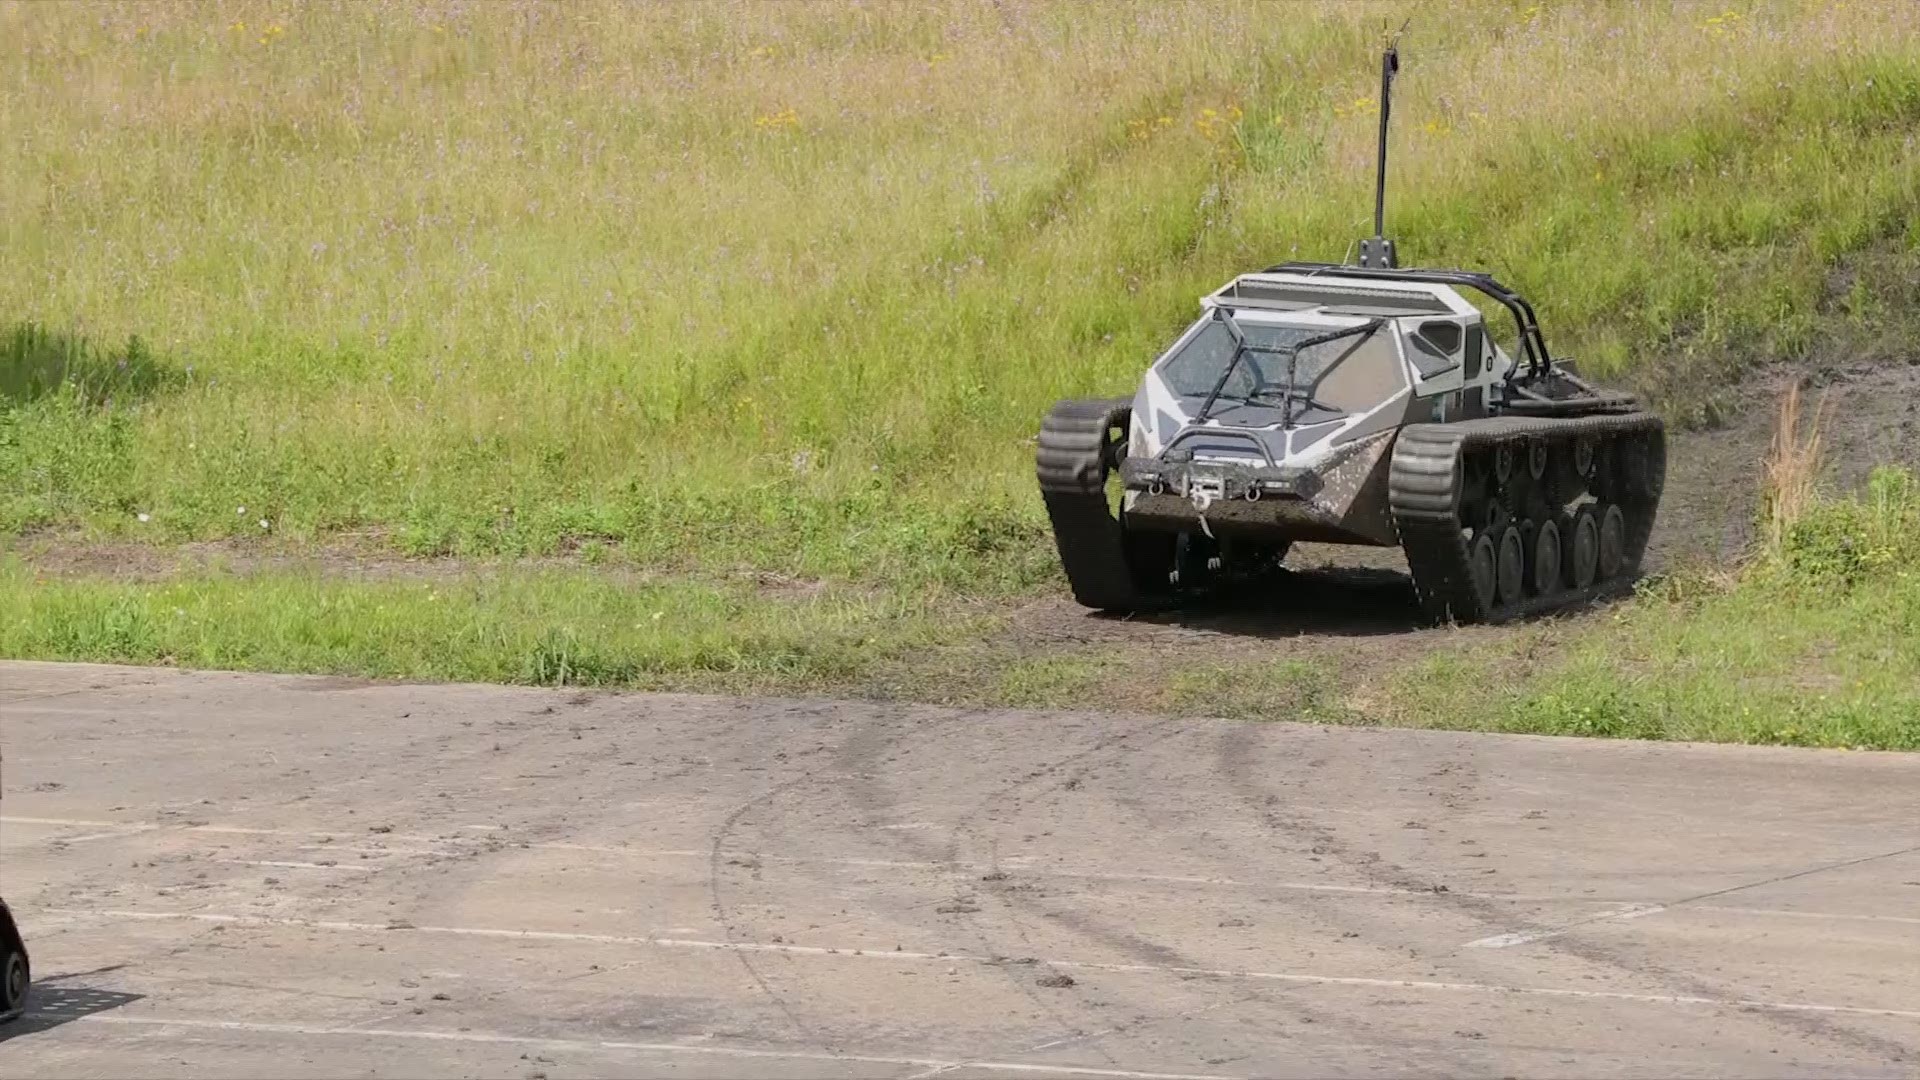 The United States Army Futures Command is testing unmanned ground combat vehicles in Texas.